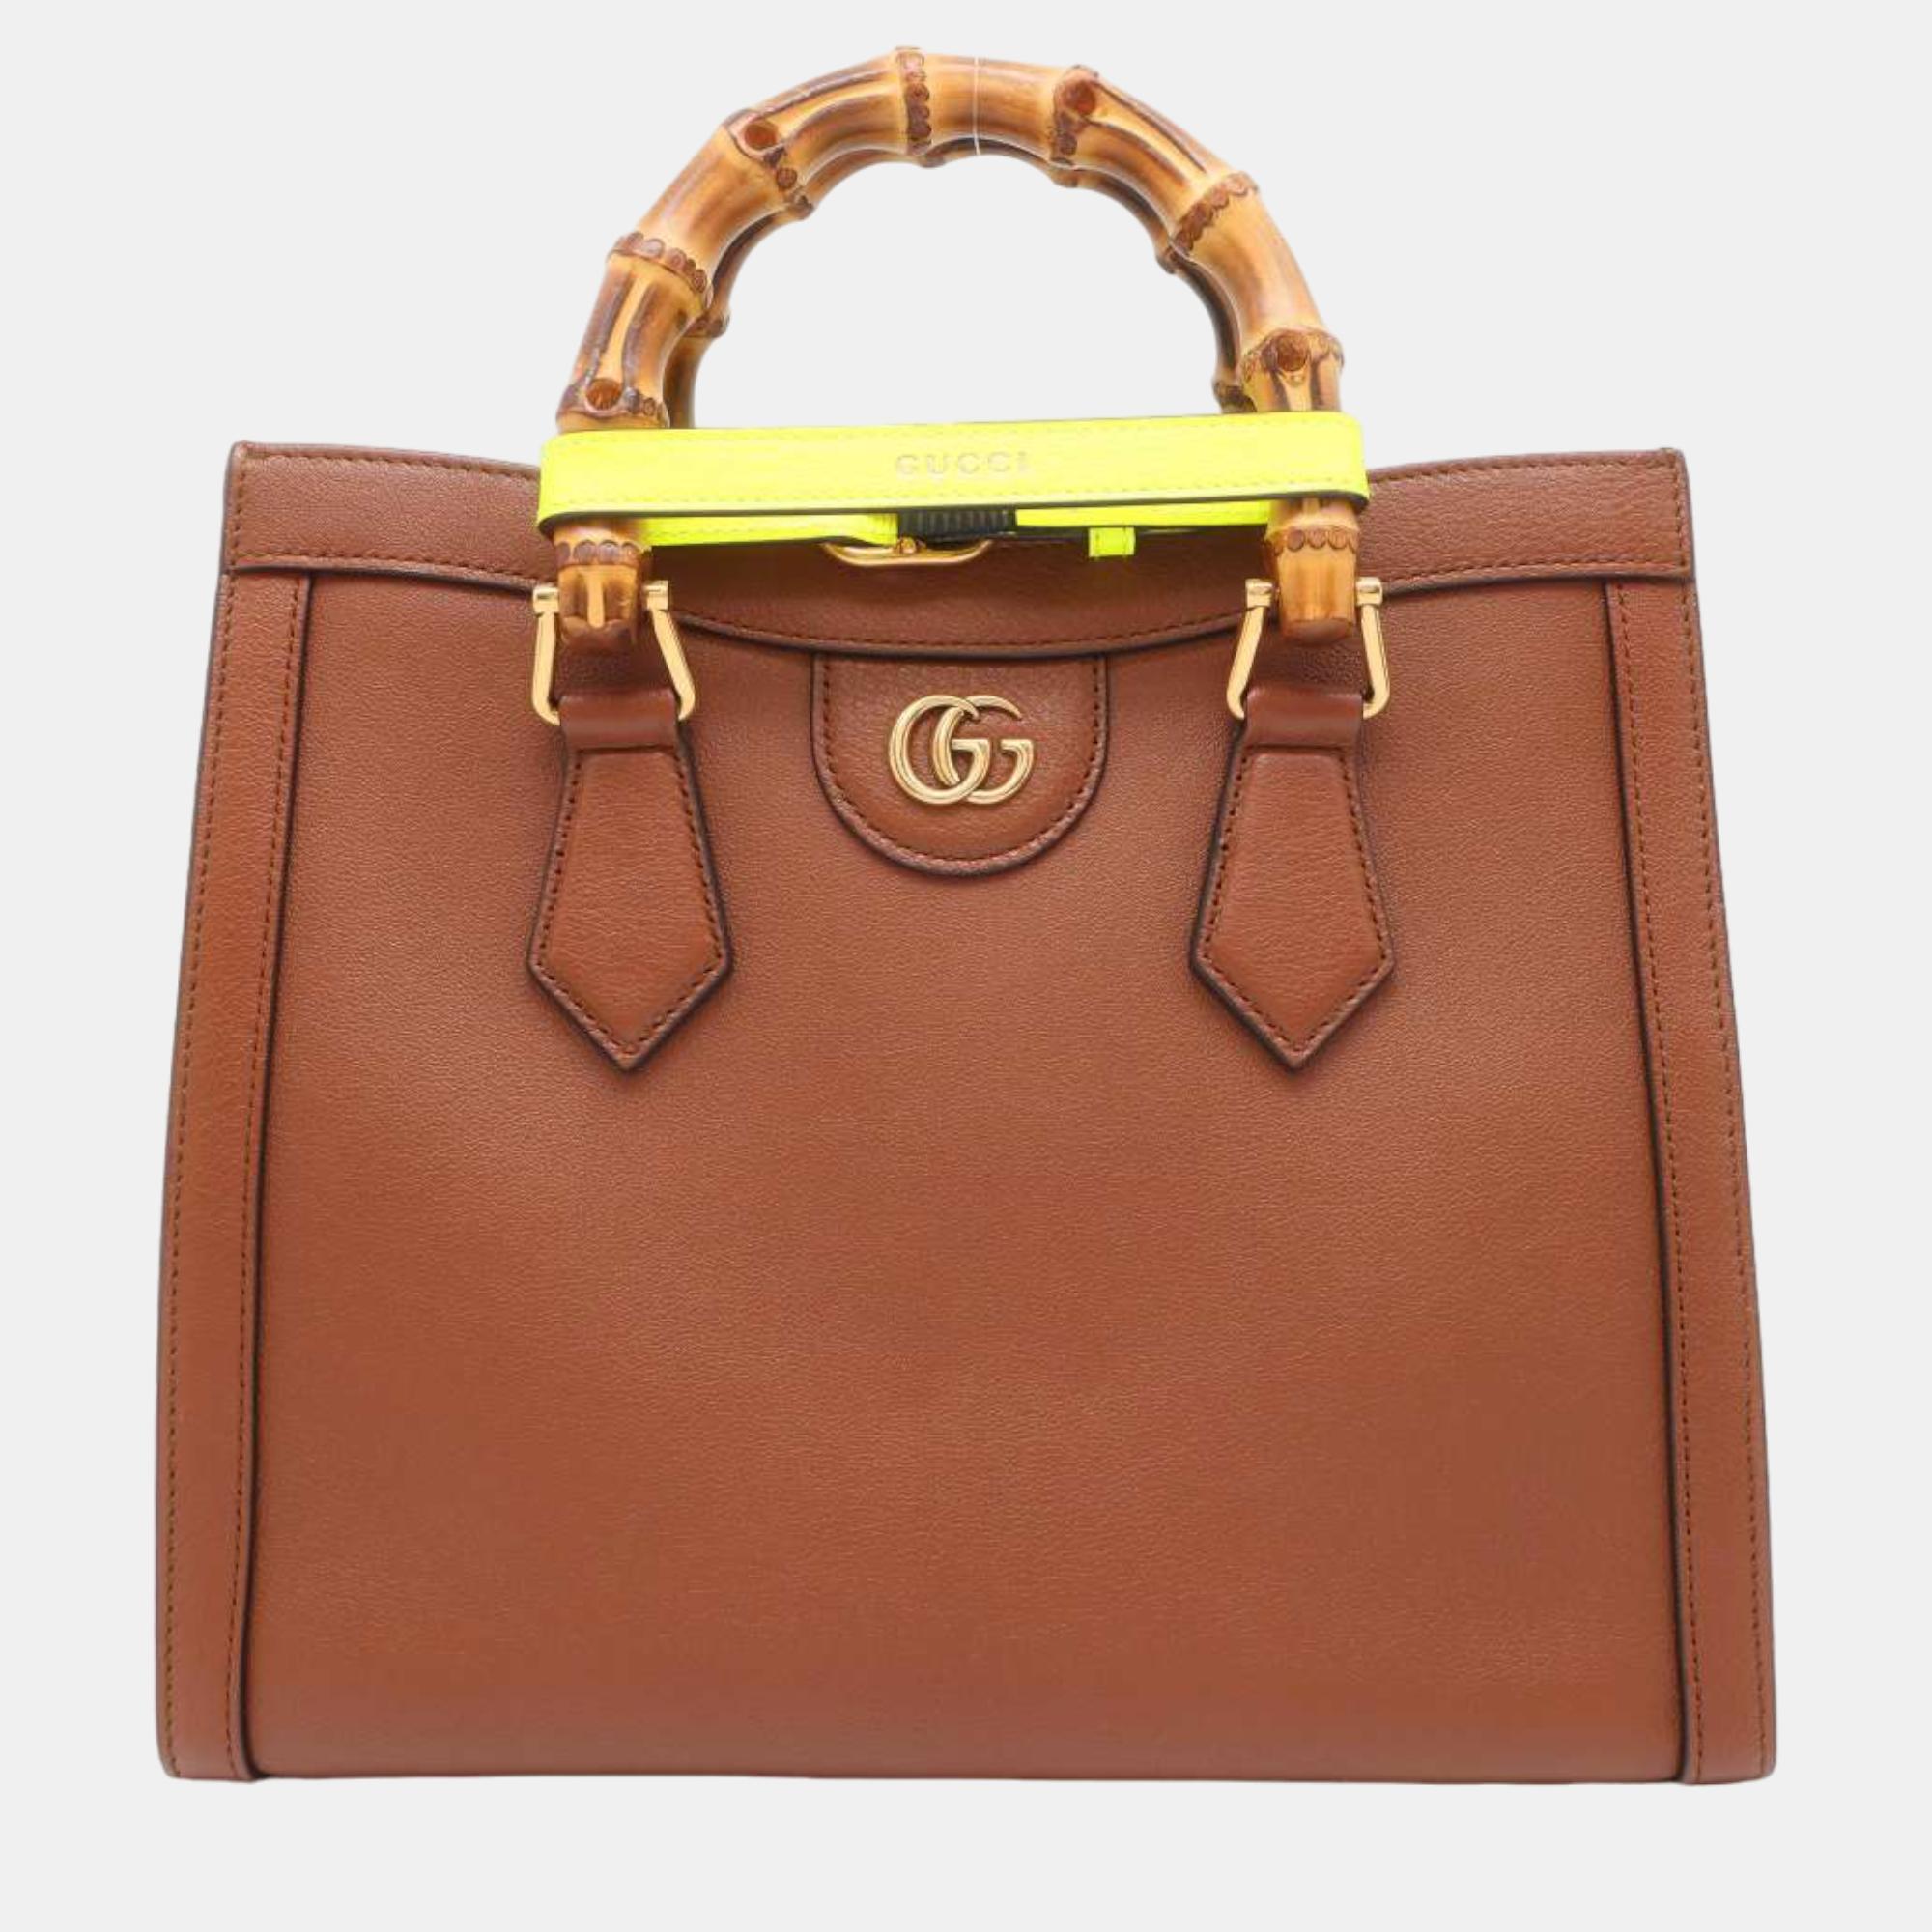 Gucci brown leather small bamboo diana tote bag